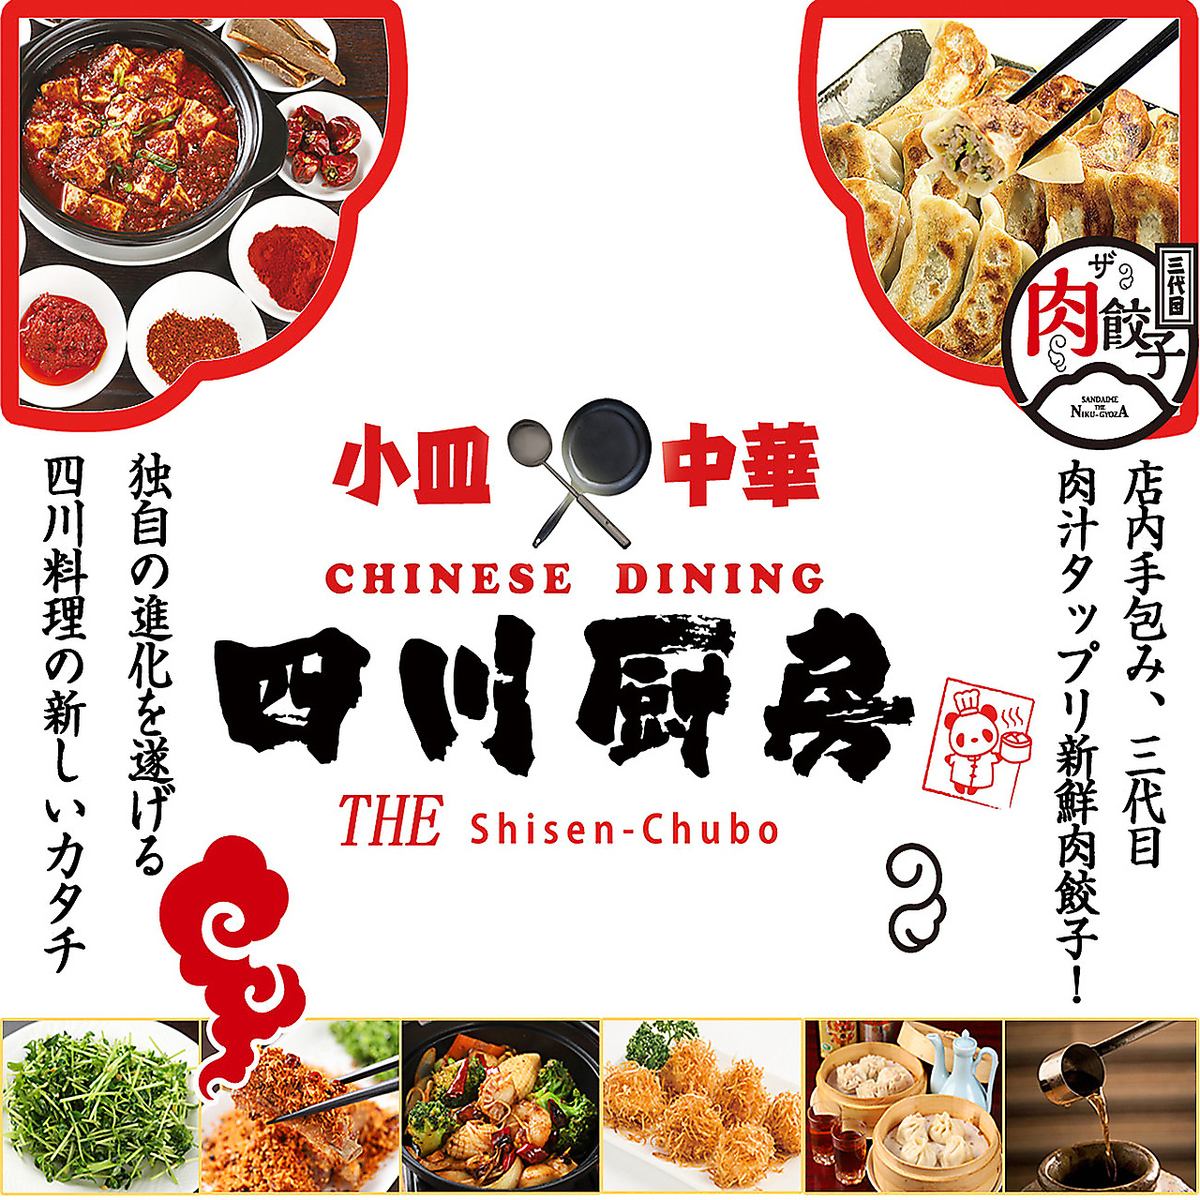 The grand menu has been renewed! A lot of real Chinese food!